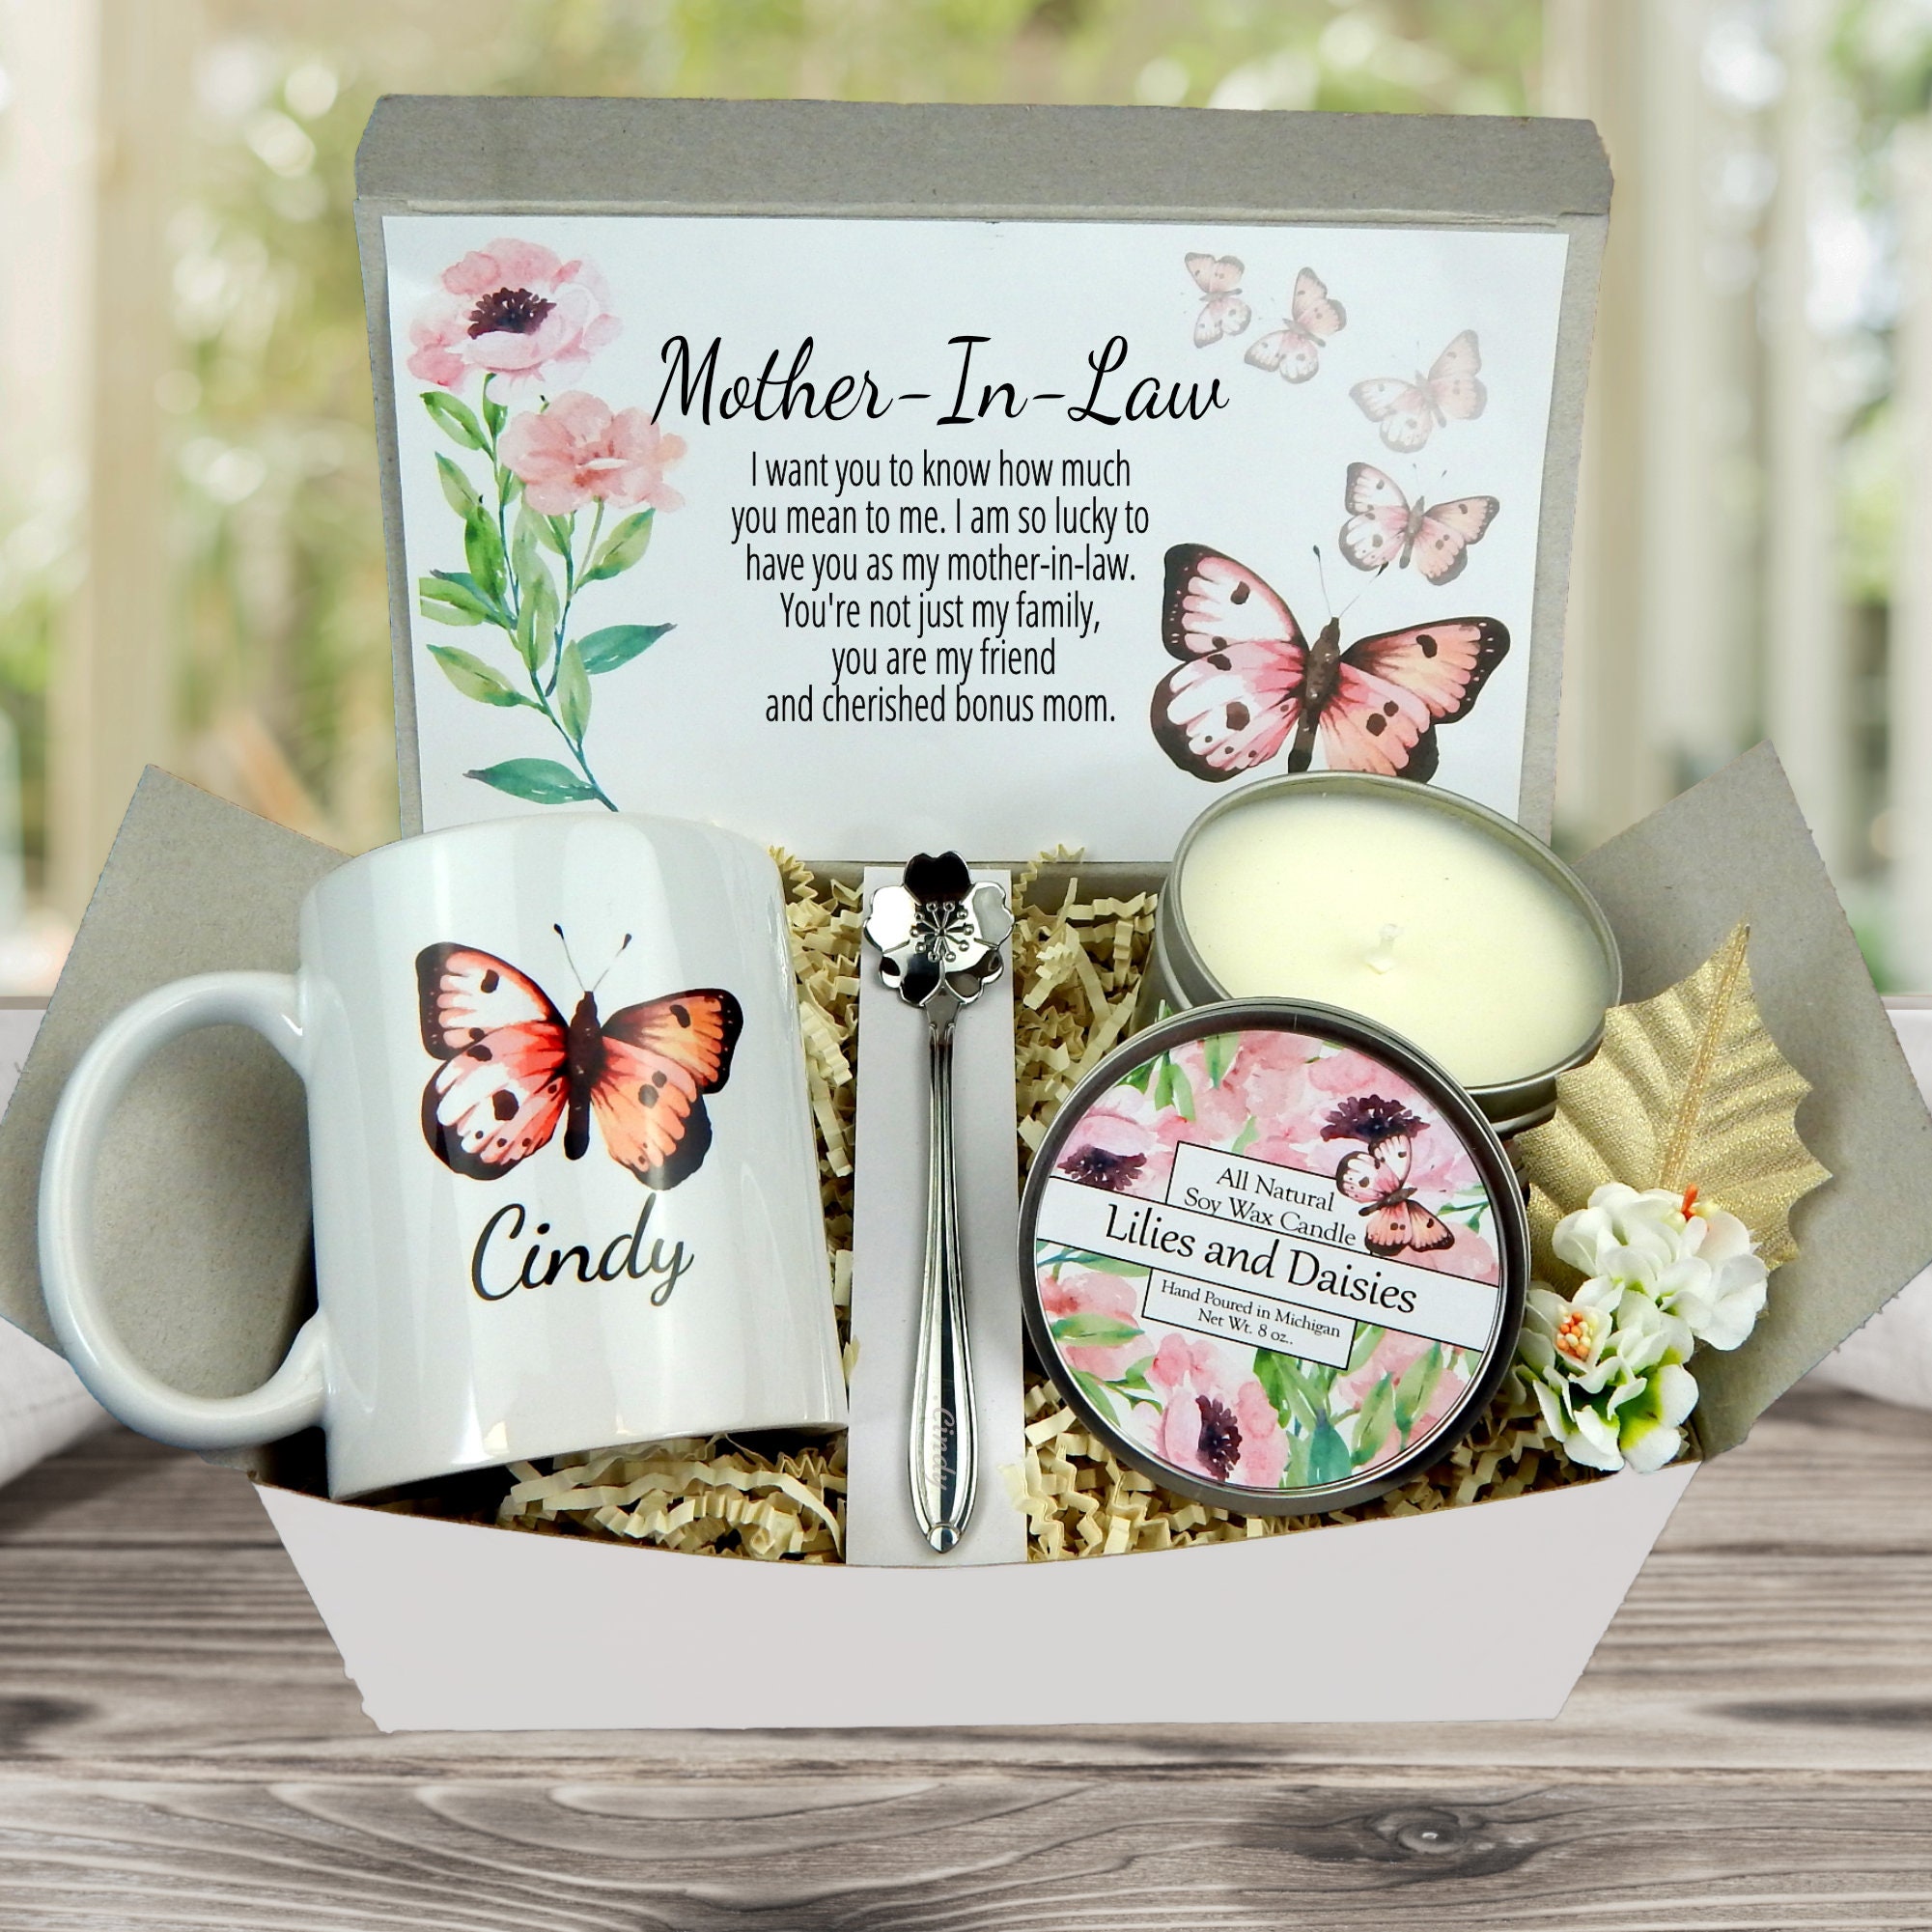  Maustic Gifts for Mother in Law, Mother in Law Mothers Day  Christmas Birthday Gifts from Daughter in Law, Future Mother in Law Gifts,  Mother-in-Law Gifts, Mother in Law Coffee Mug 11